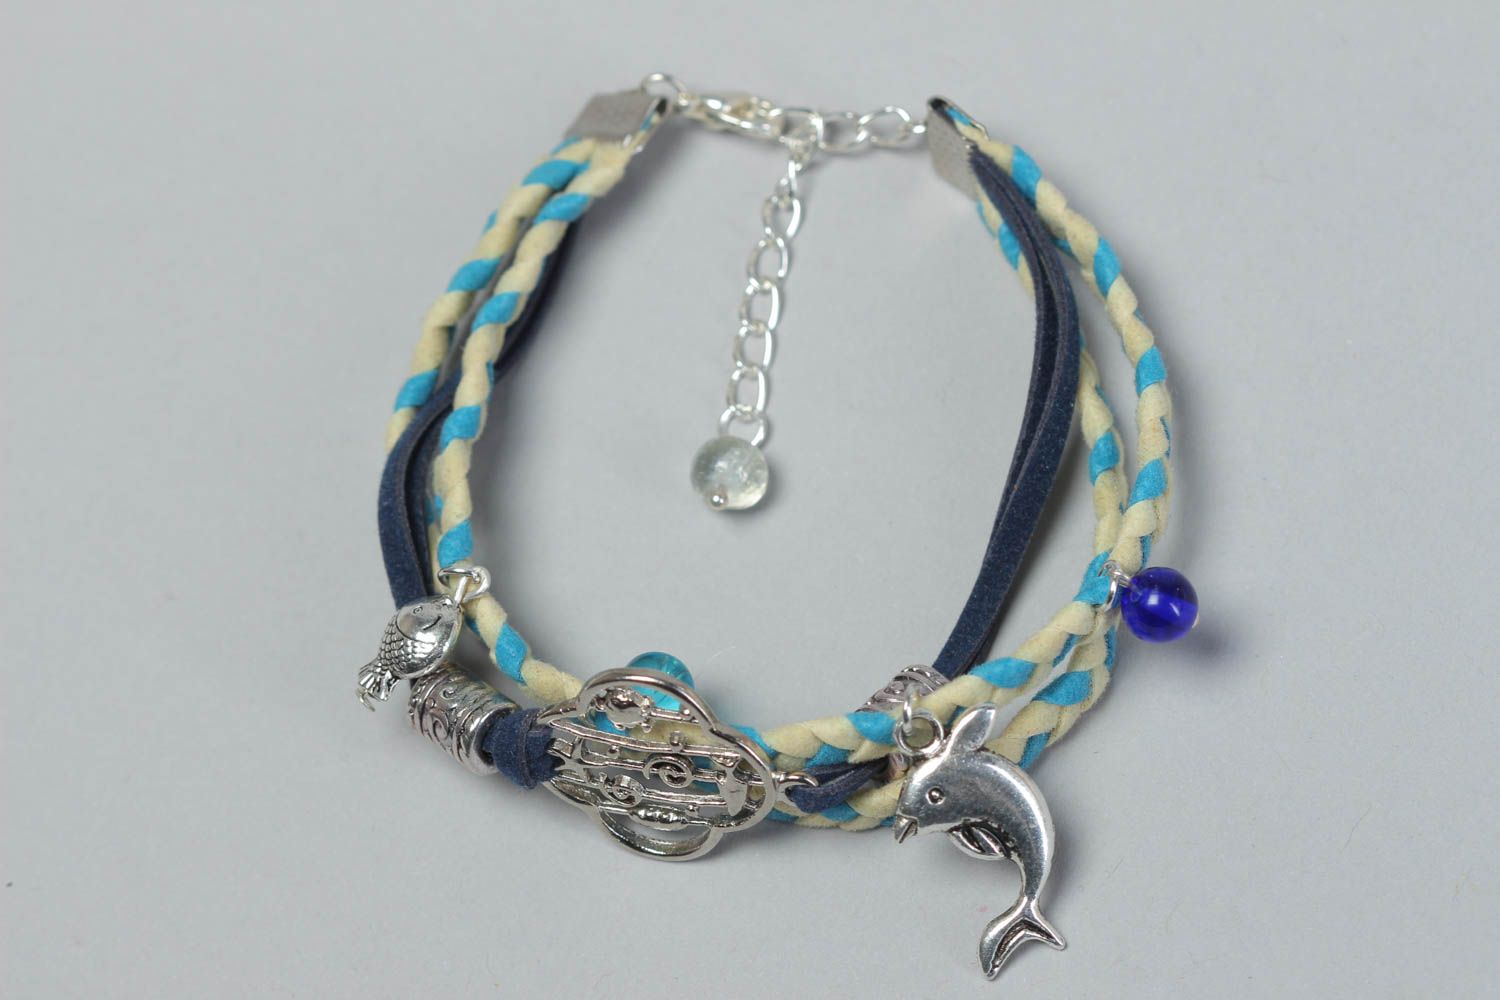 Handmade unusual blue bracelet woven leather accessory jewelry with charms photo 2